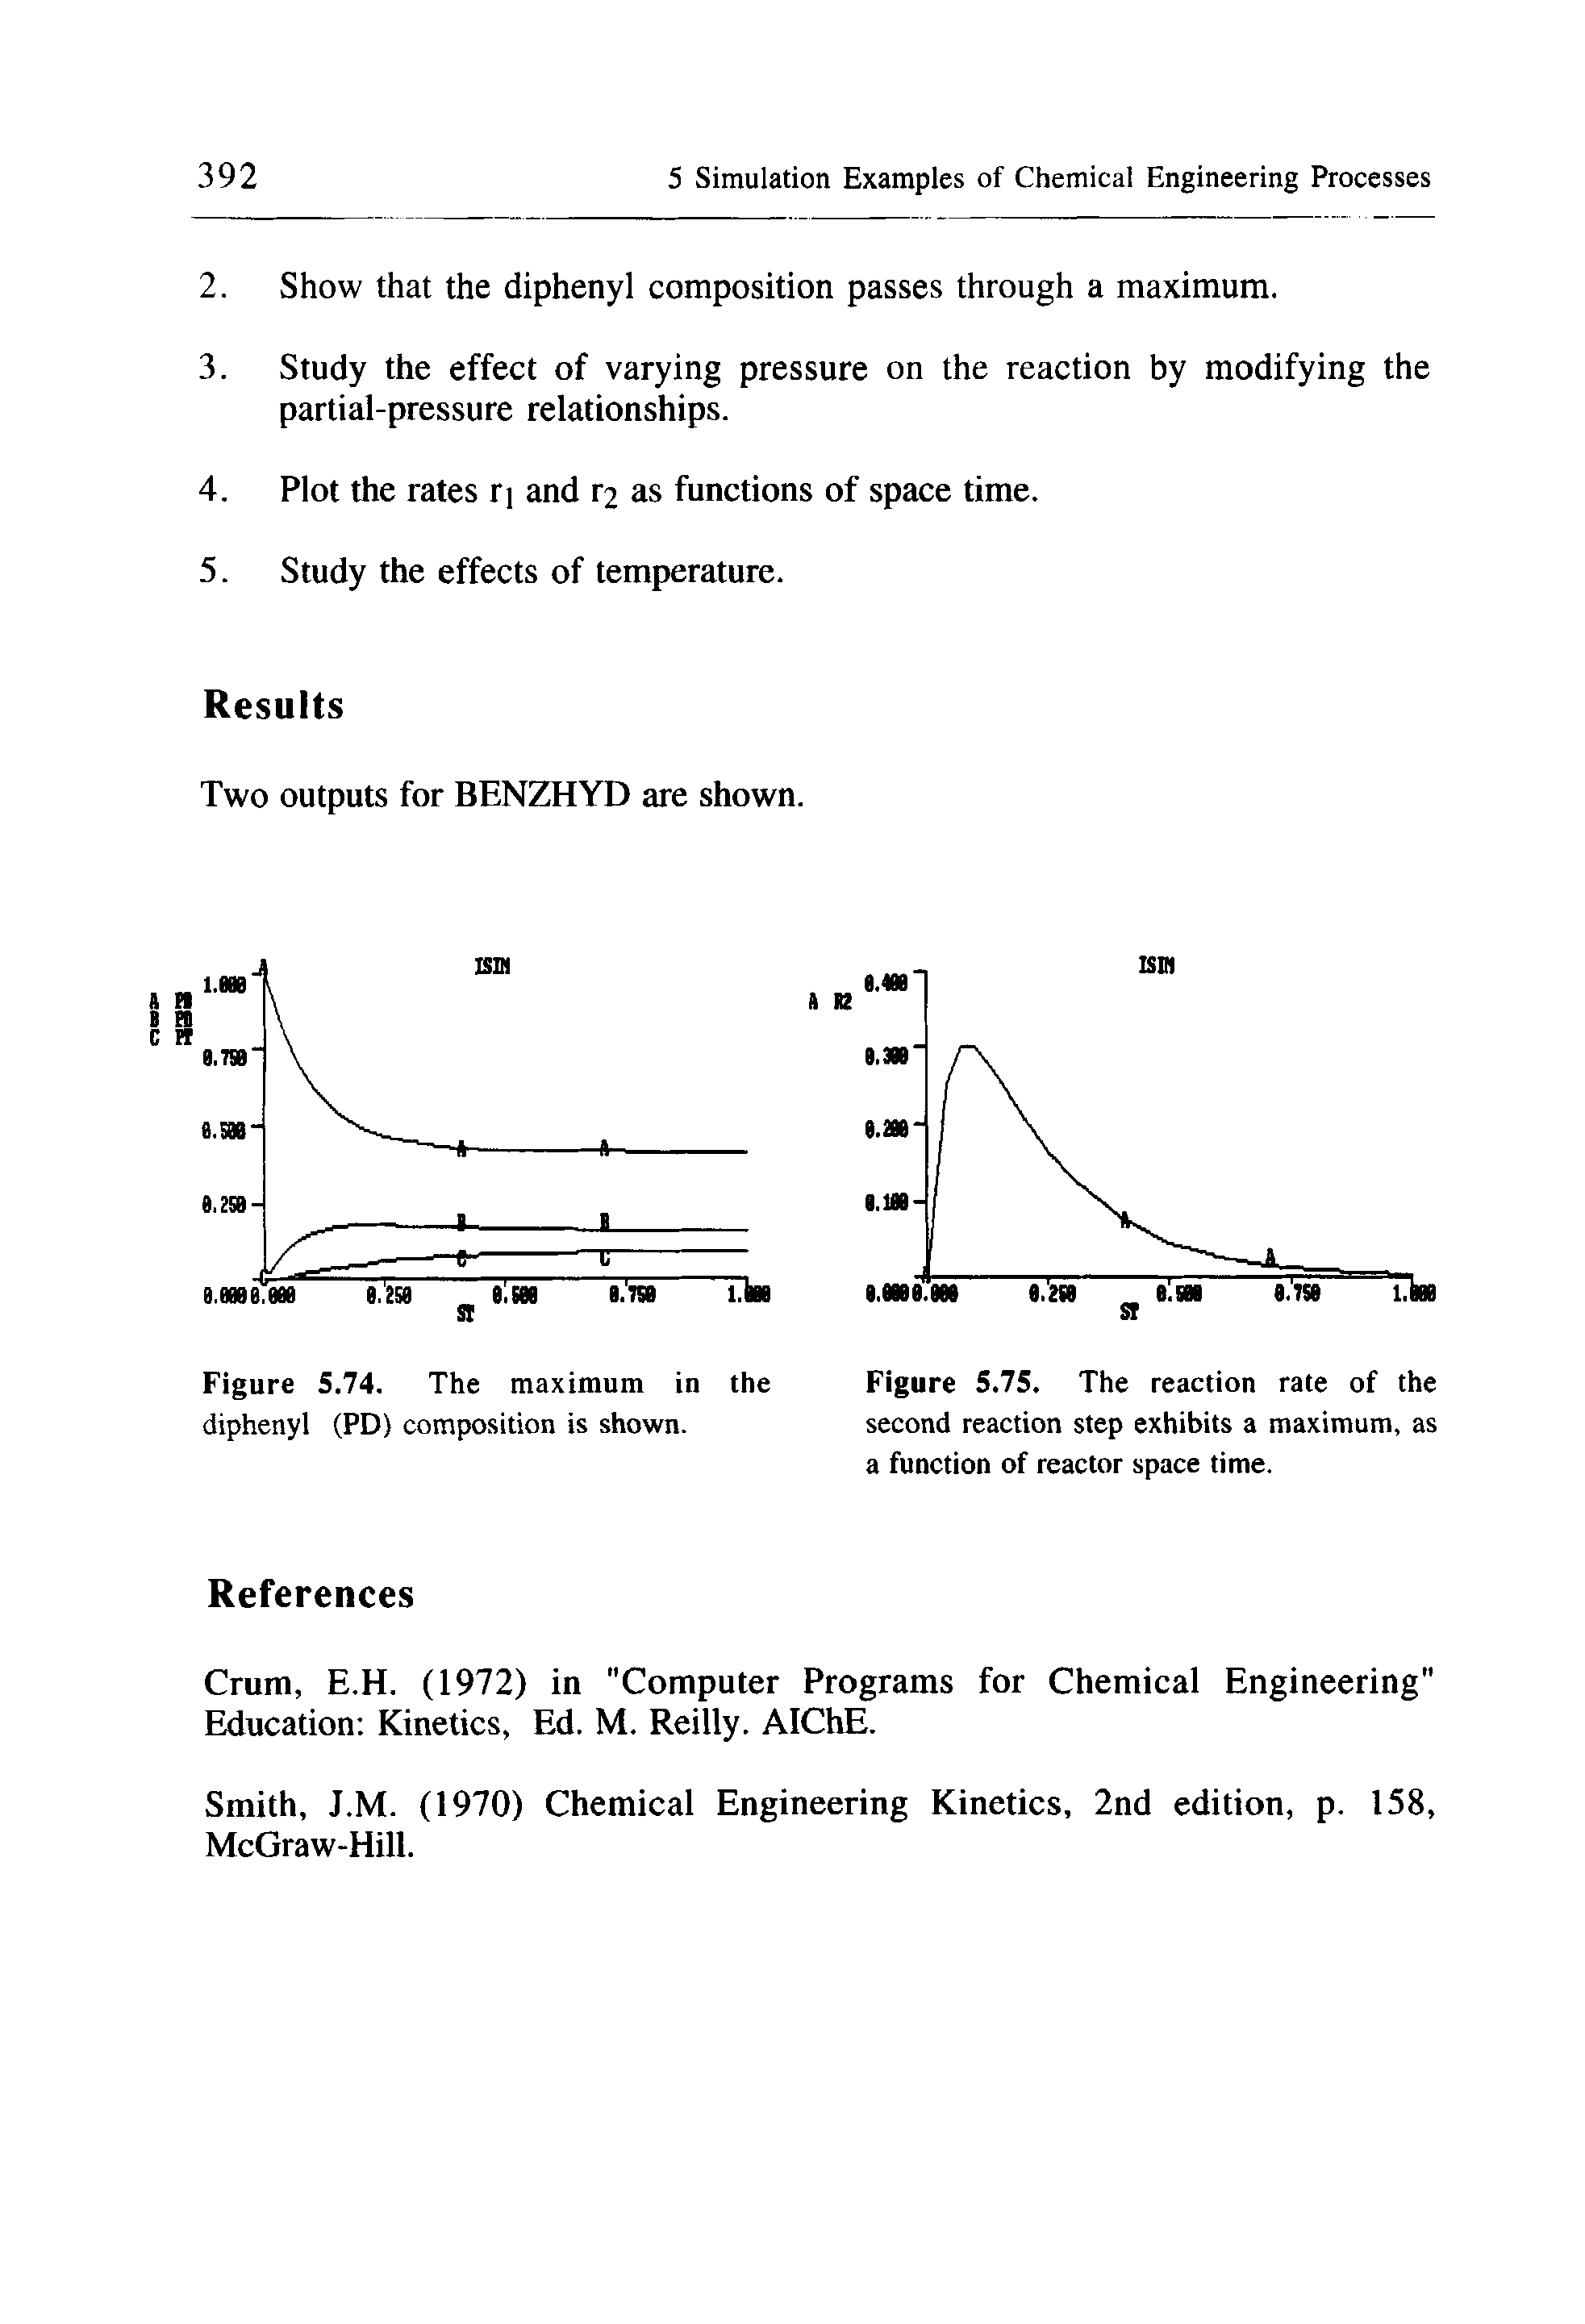 Figure 5.75. The reaction rate of the second reaction step exhibits a maximum, as a function of reactor space time.